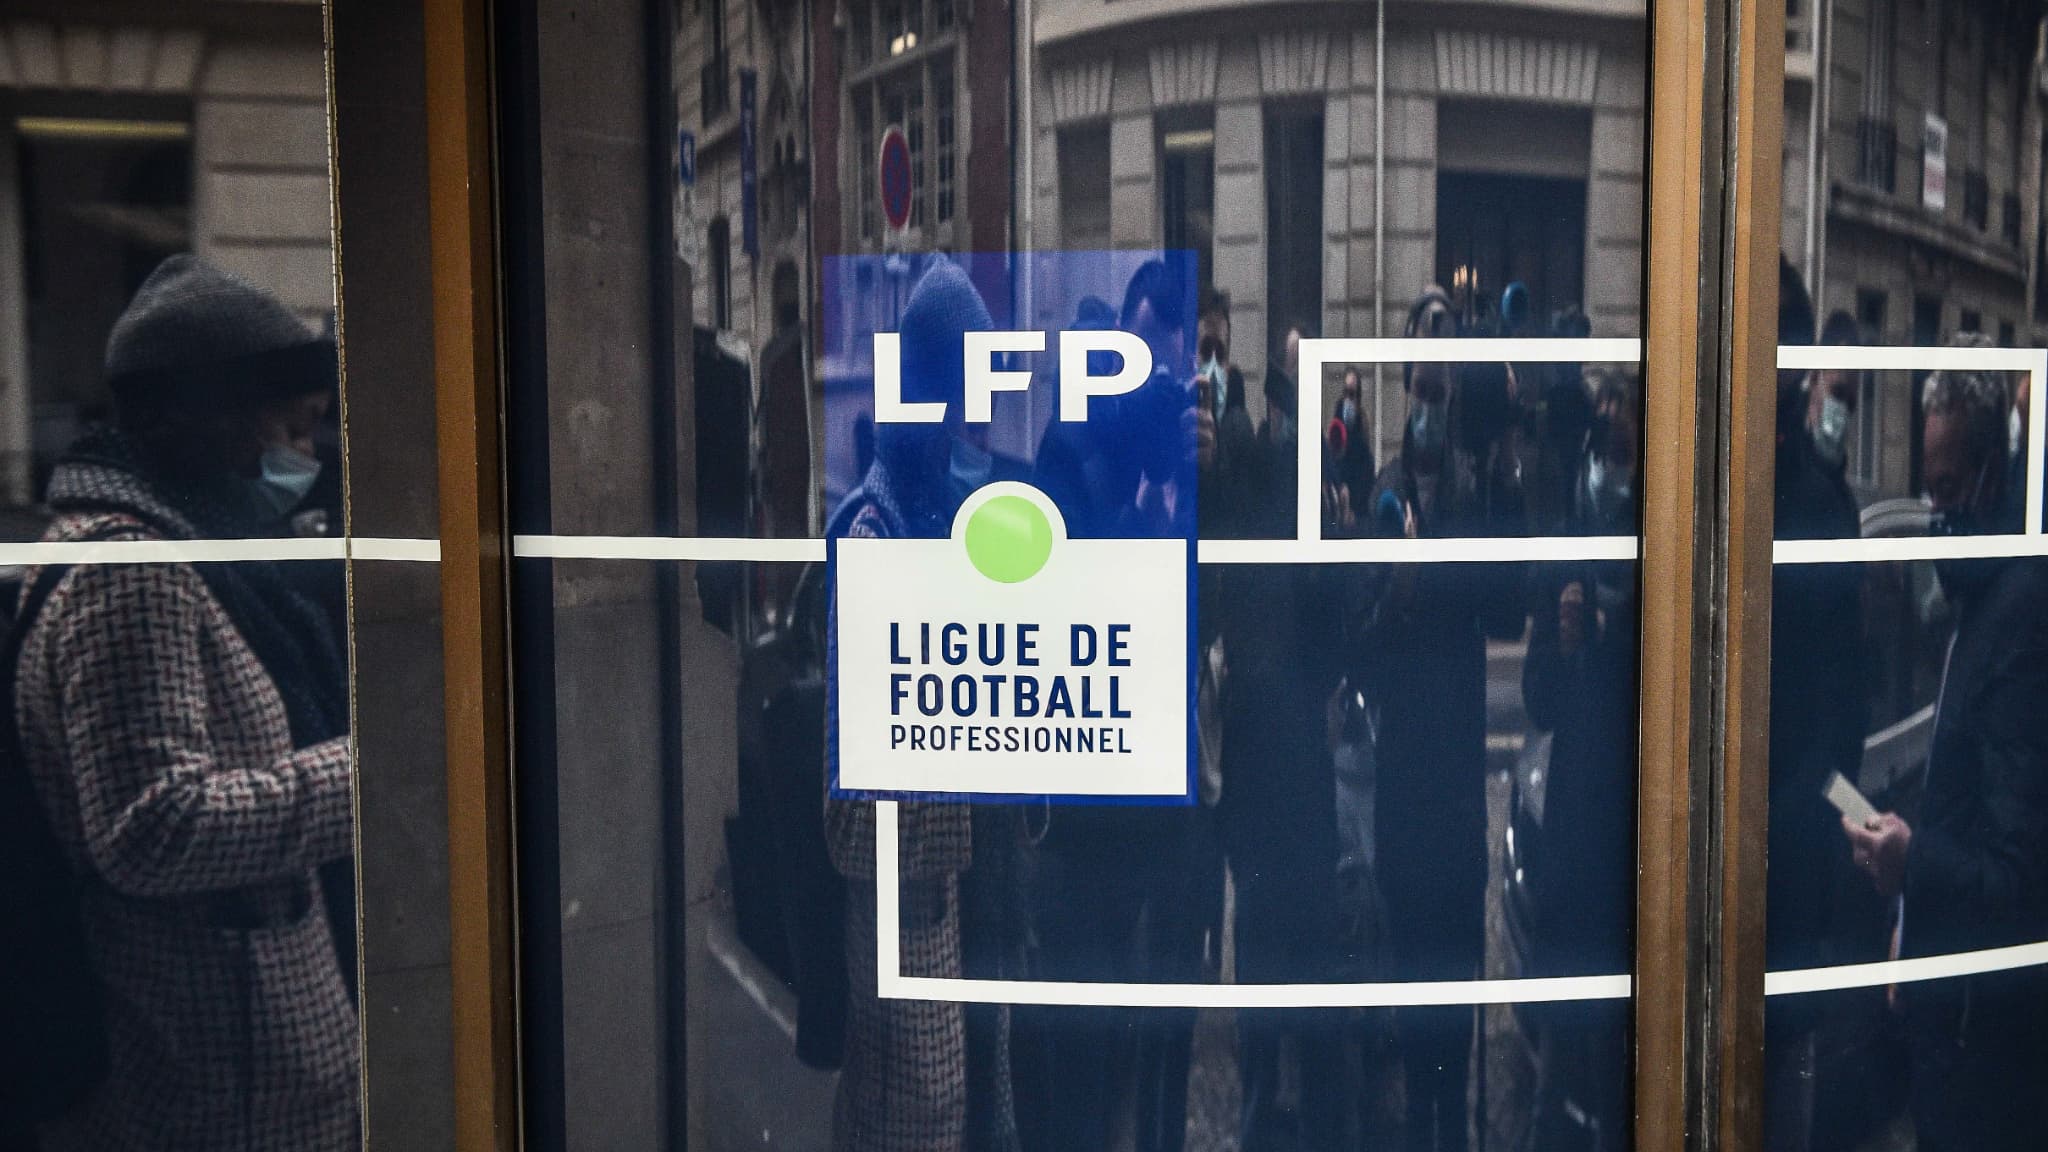 LFP enters into “exclusive negotiations” with the CVC fund for its trading company